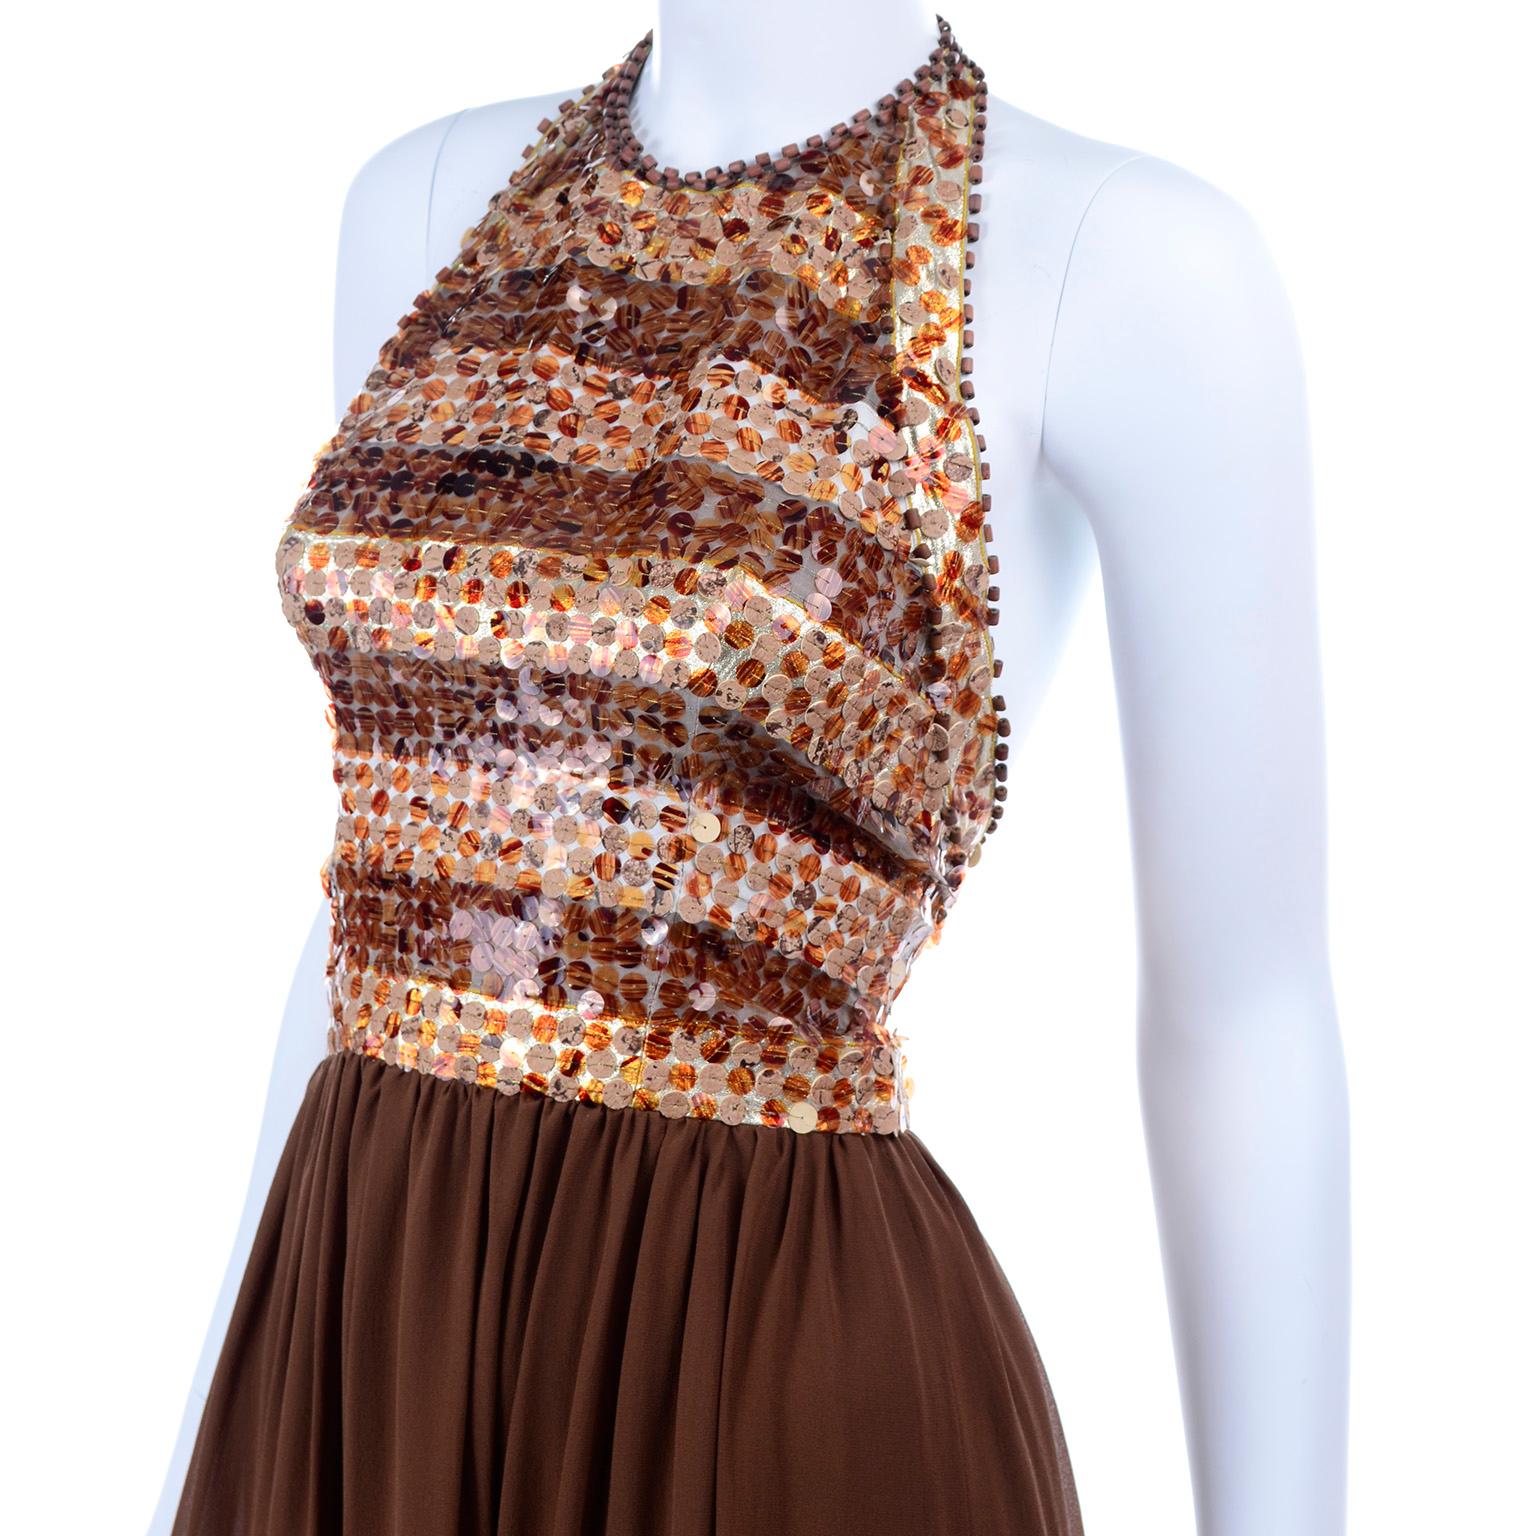 1996 Givenchy Vintage Chocolate Brown Silk Halter Beaded Evening Dress For Sale 1